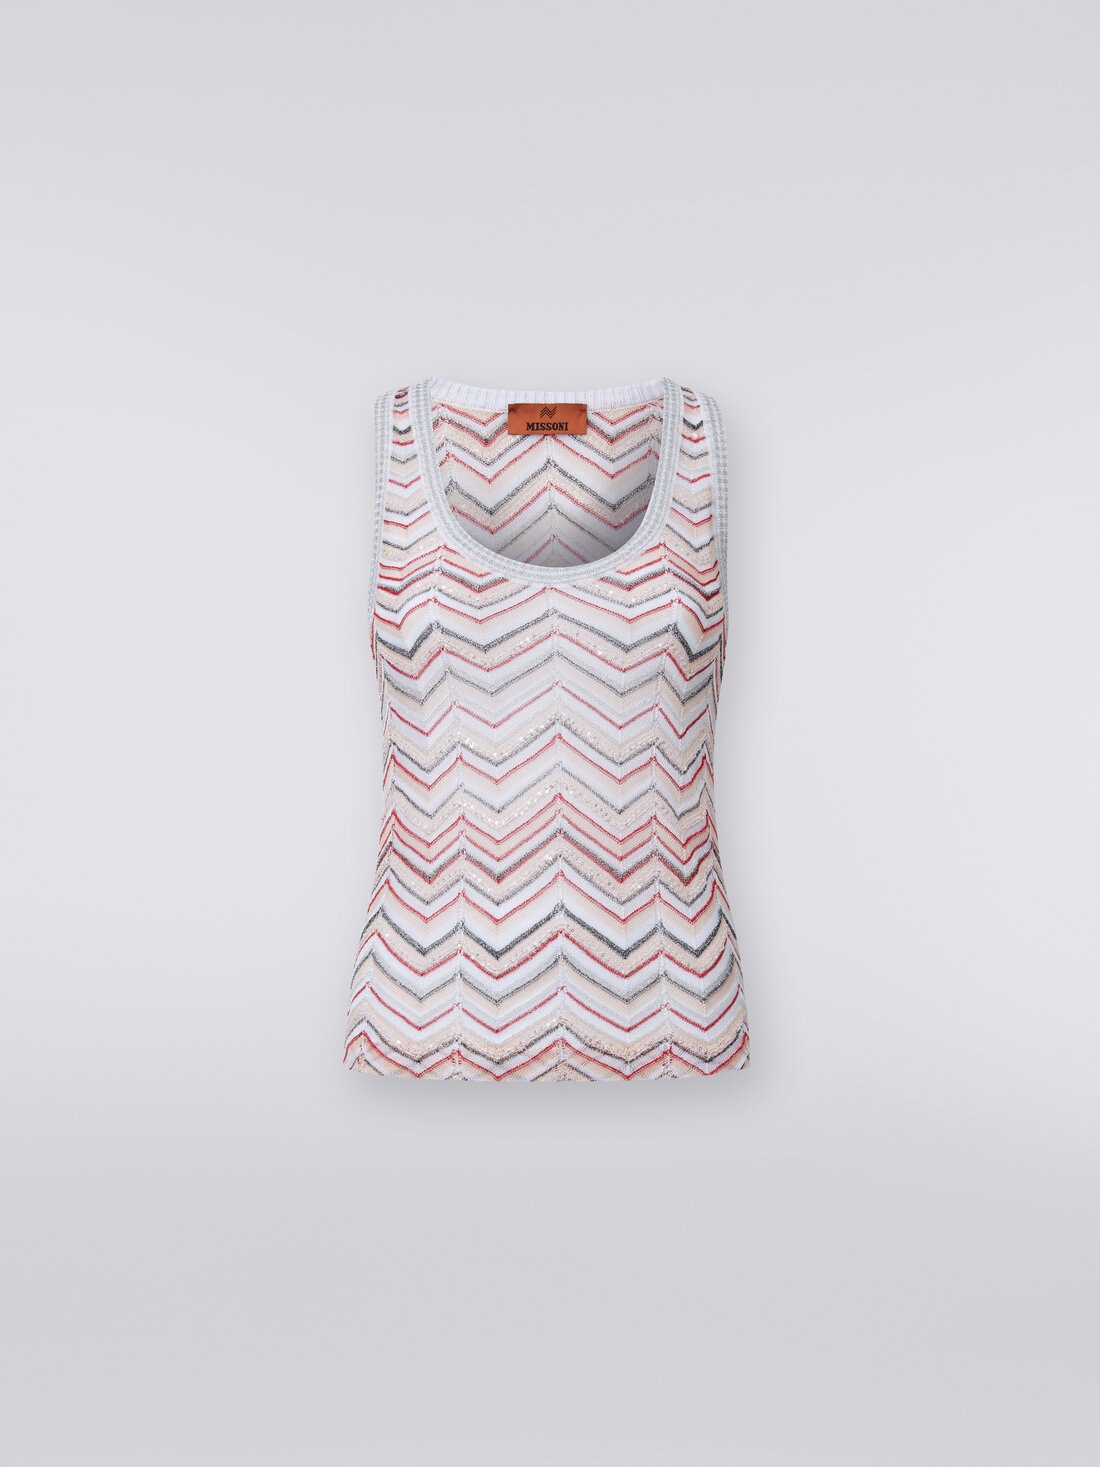 Tank top in zigzag knit with lurex and sequins, Multicoloured  - DS24SK0WBK033ISM9AO - 0